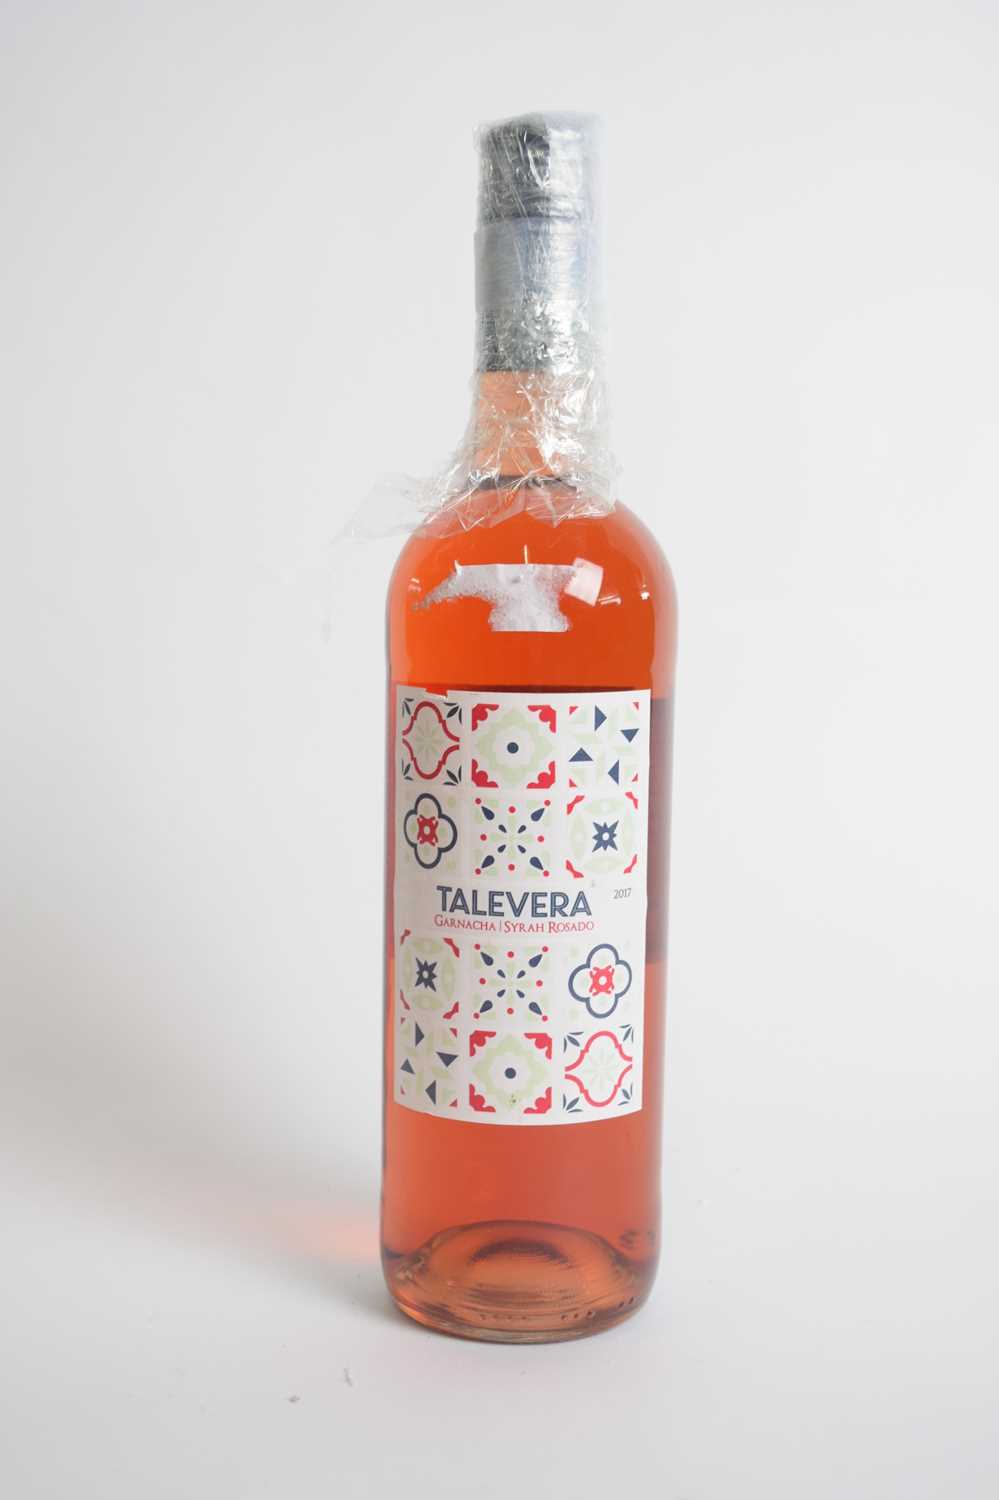 One bottle Talevera 75cl - Image 2 of 3